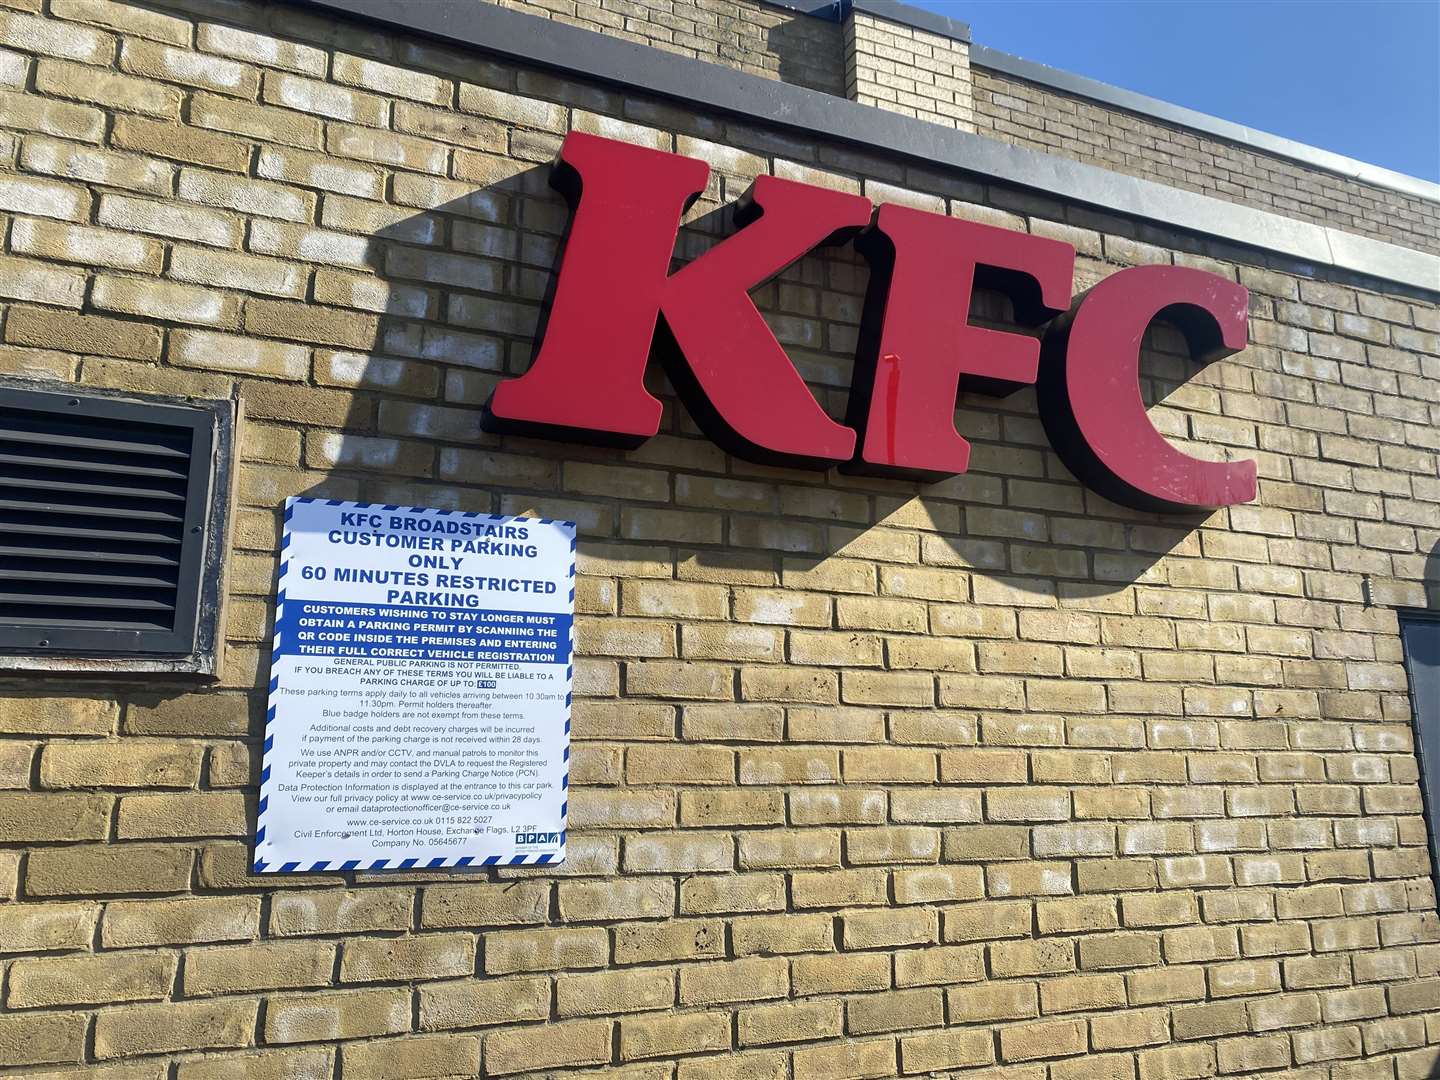 KFC Westwood has not yet responded to the comments made by Louise